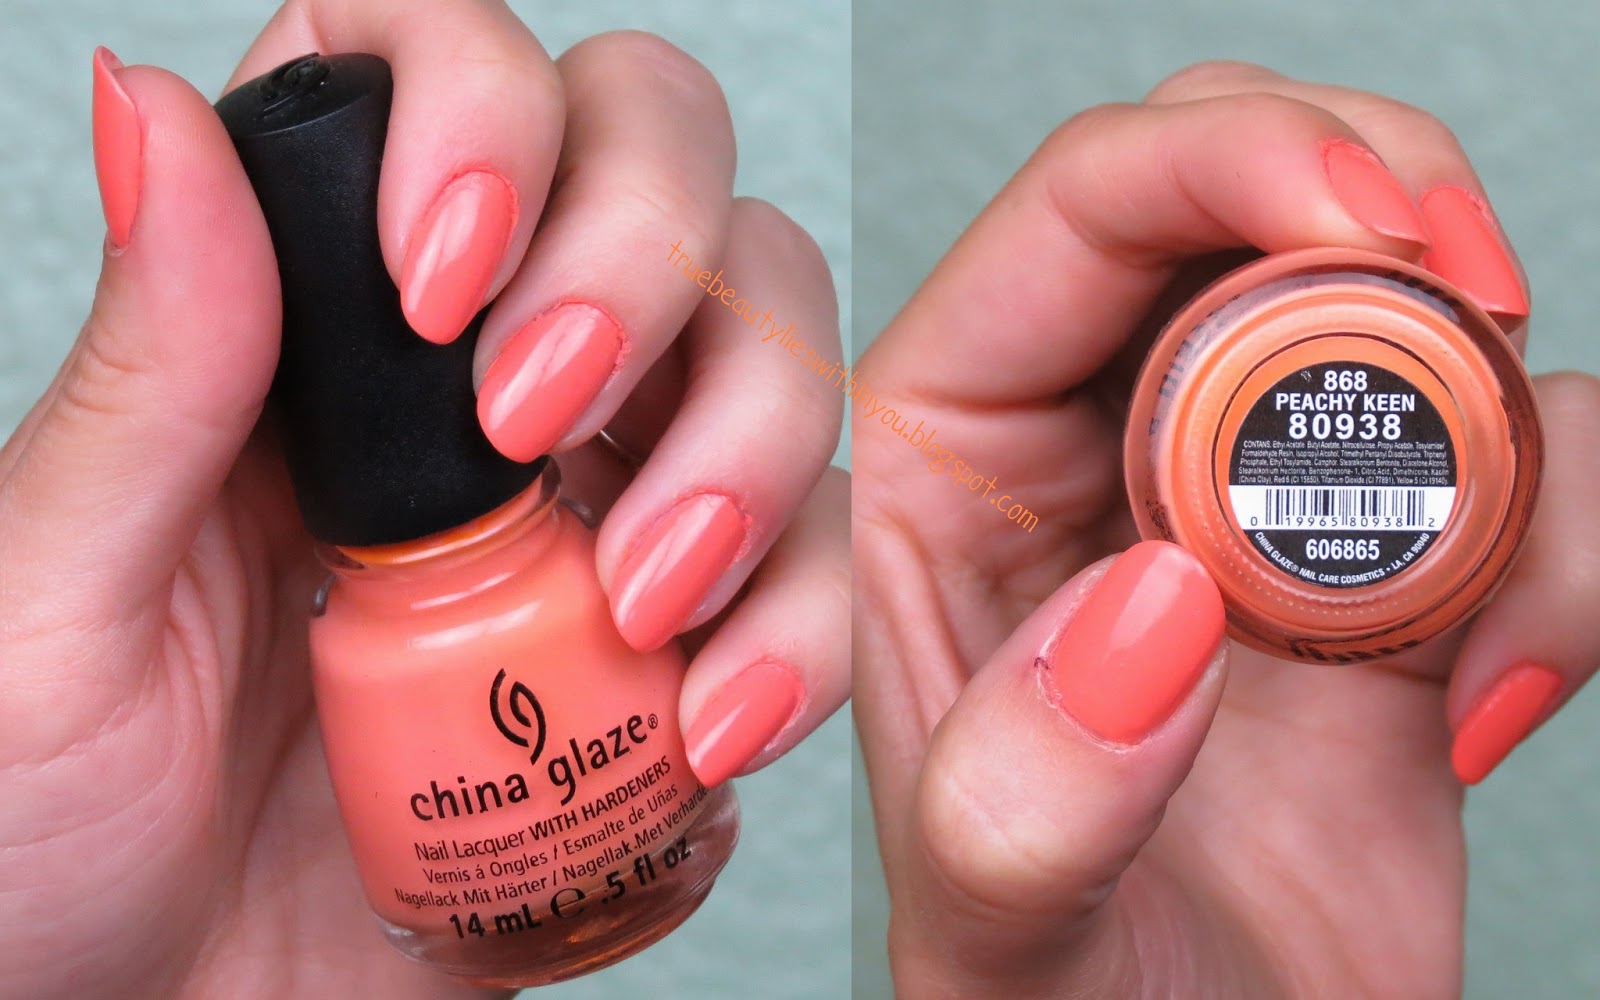 Bliss Nail Polish in "Peachy Keen" - wide 4